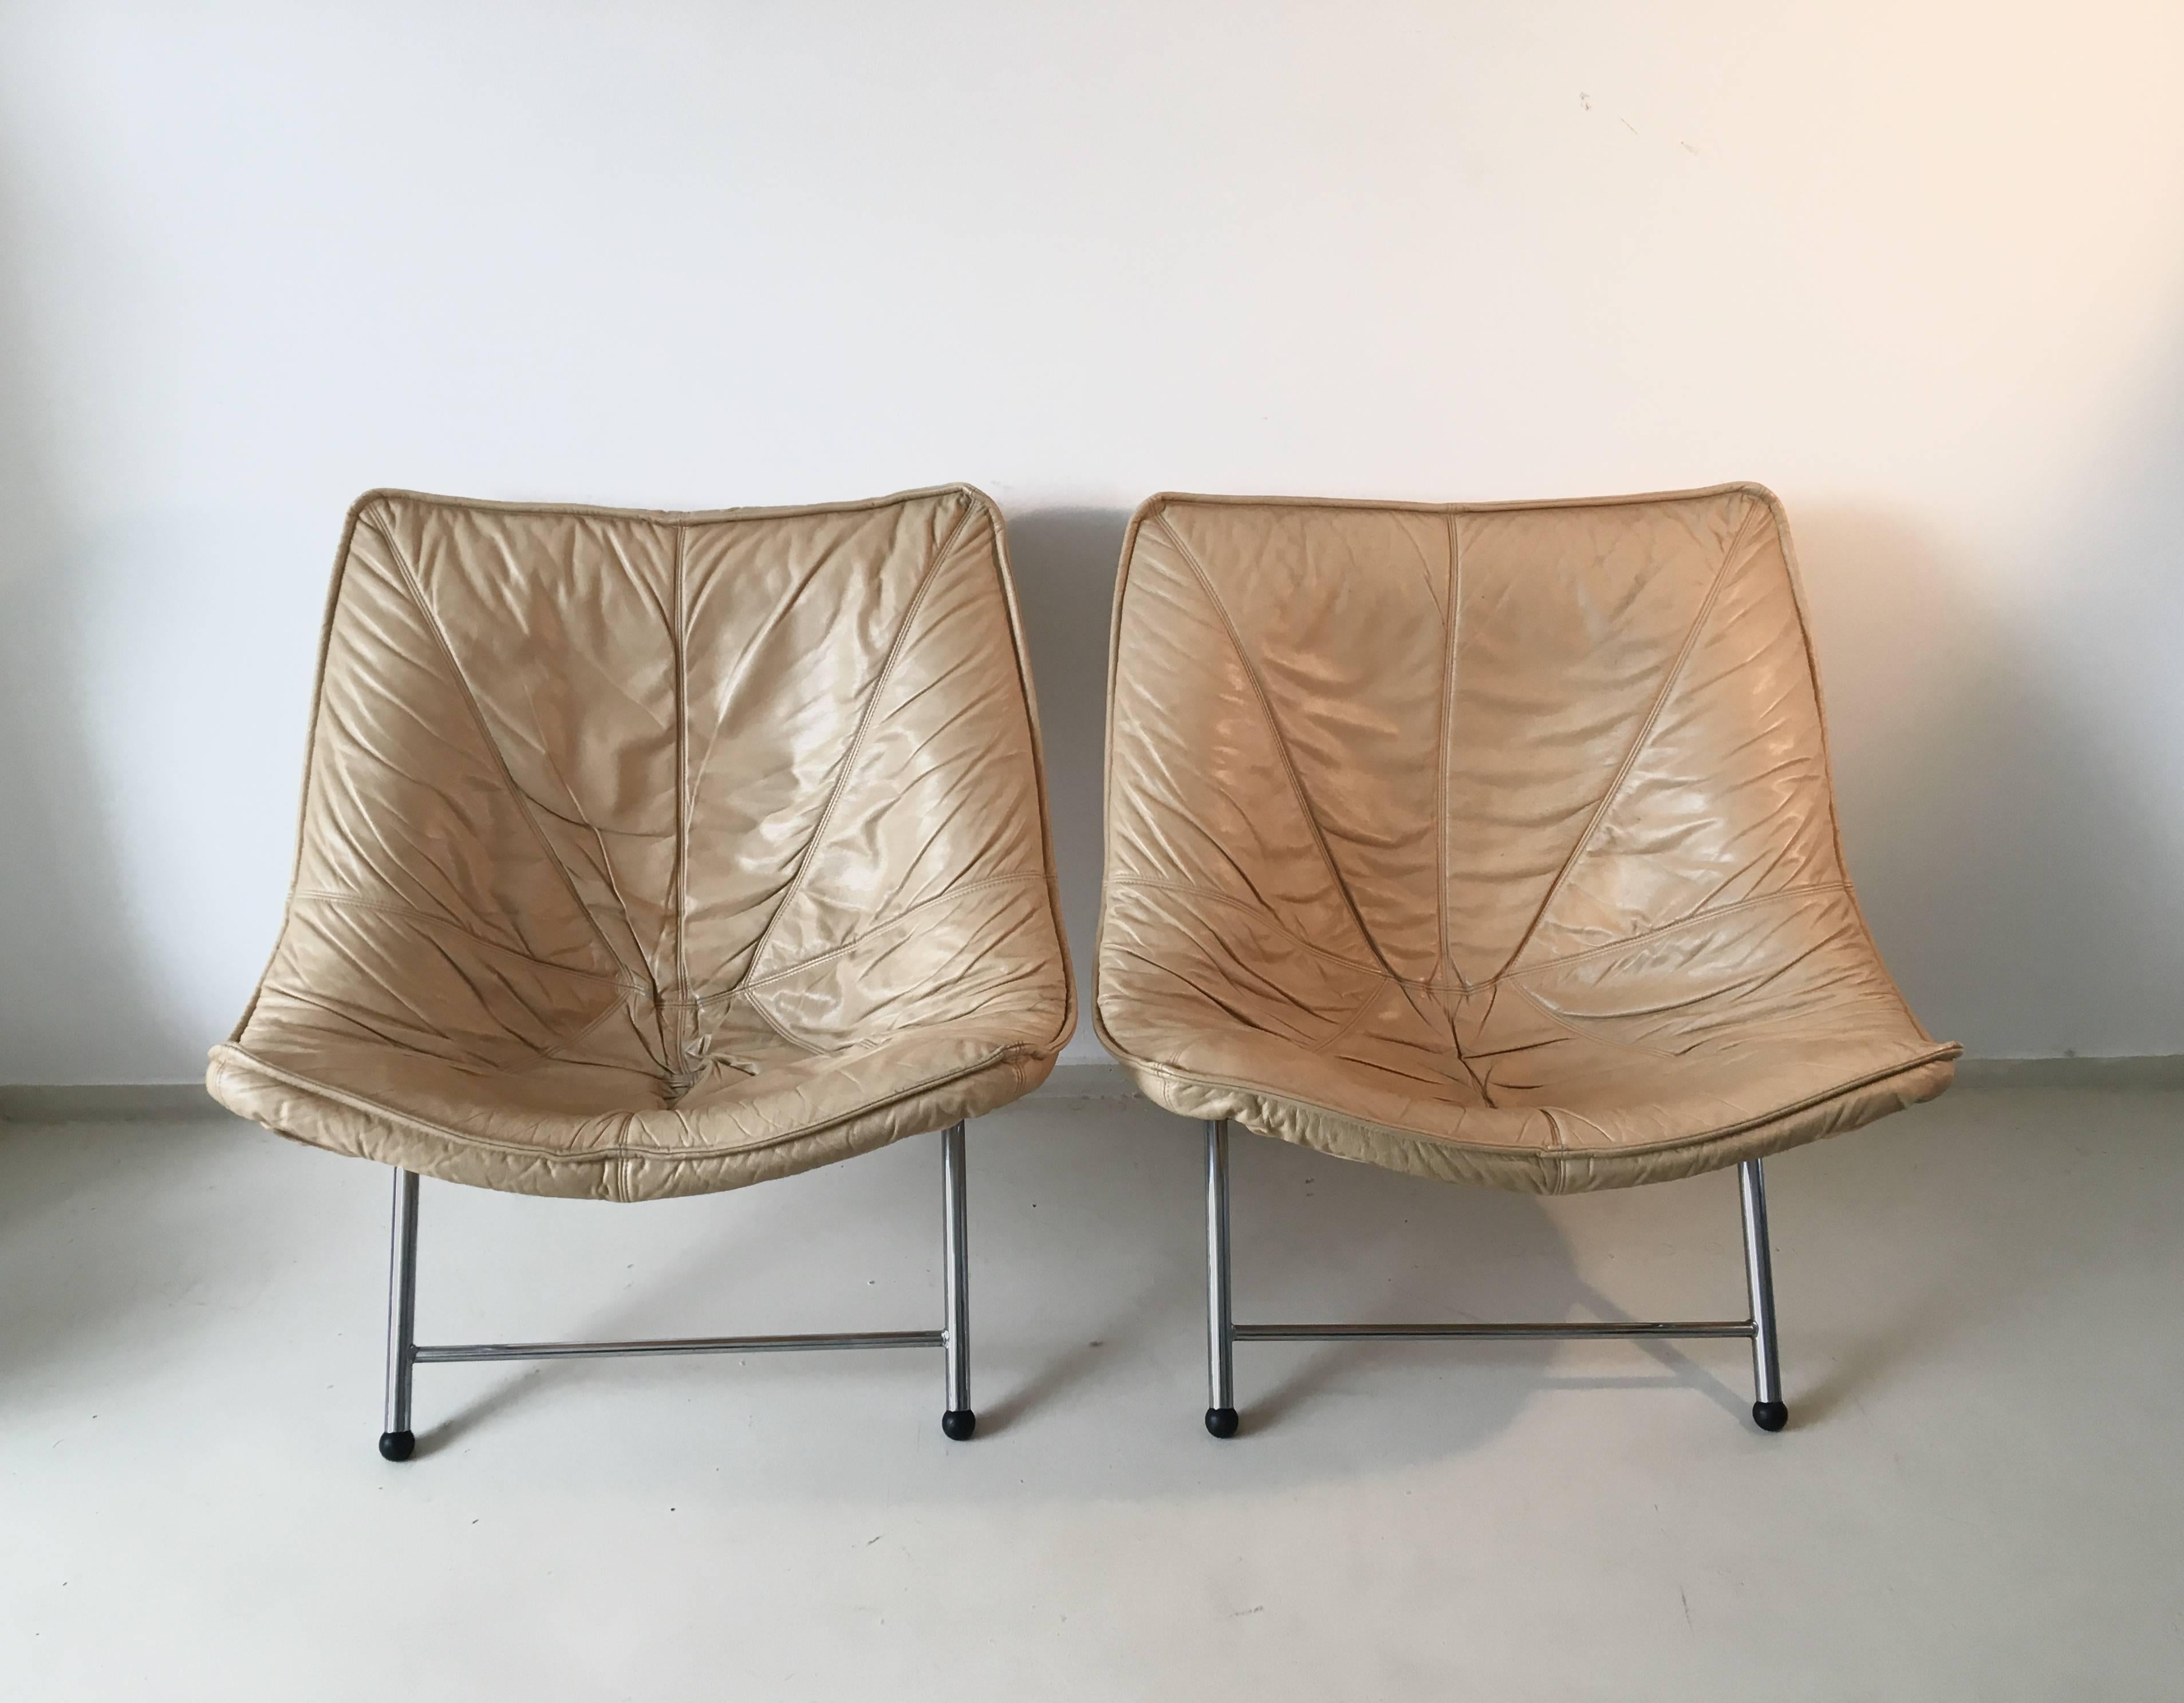 Foldable easy chairs designed by Teun van Zanten for Molinari in the Netherlands in the 1970s. These chairs feature a tubular chrome-plated frame with beige or yellow leather upholstery. They remain in a good condition with only minor signs of age